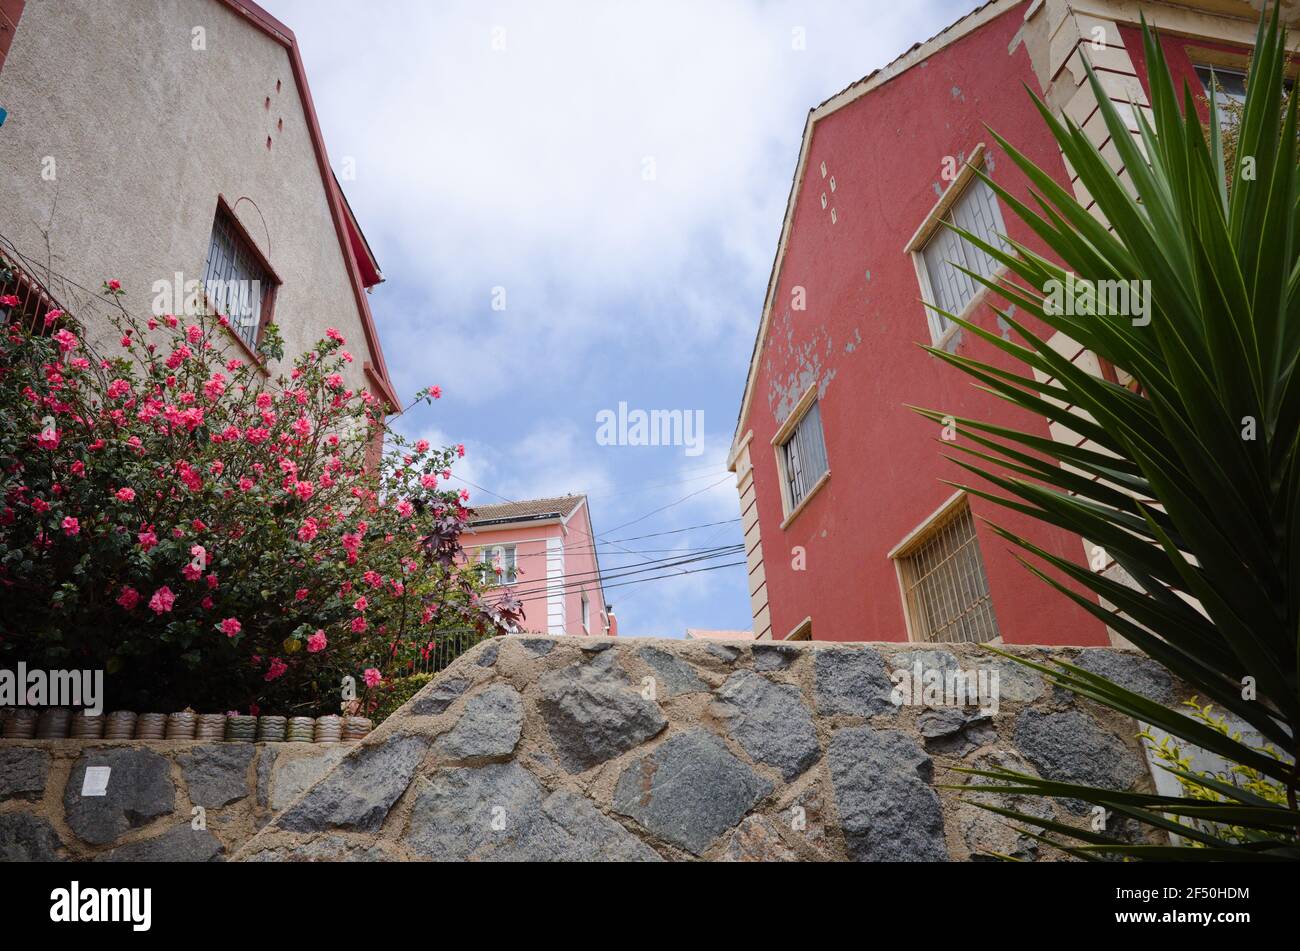 Old private houses on the hill in Valparaiso. Green plant, stone fence and flowering tree in the foreground. Typical residential area with cottages Stock Photo